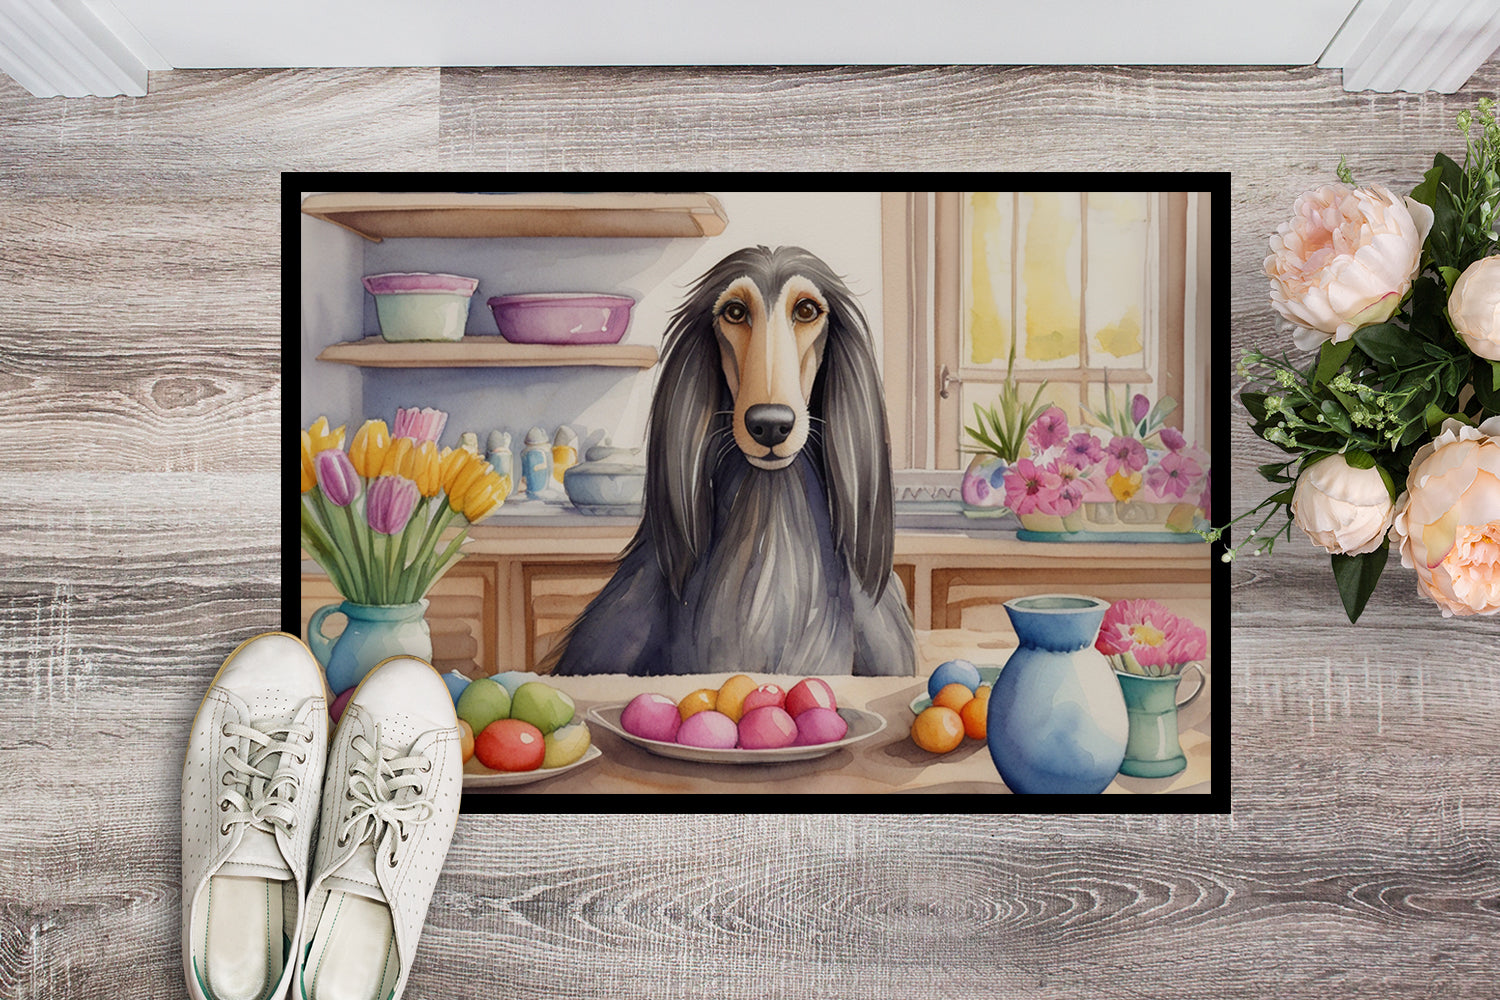 Buy this Decorating Easter Afghan Hound Doormat